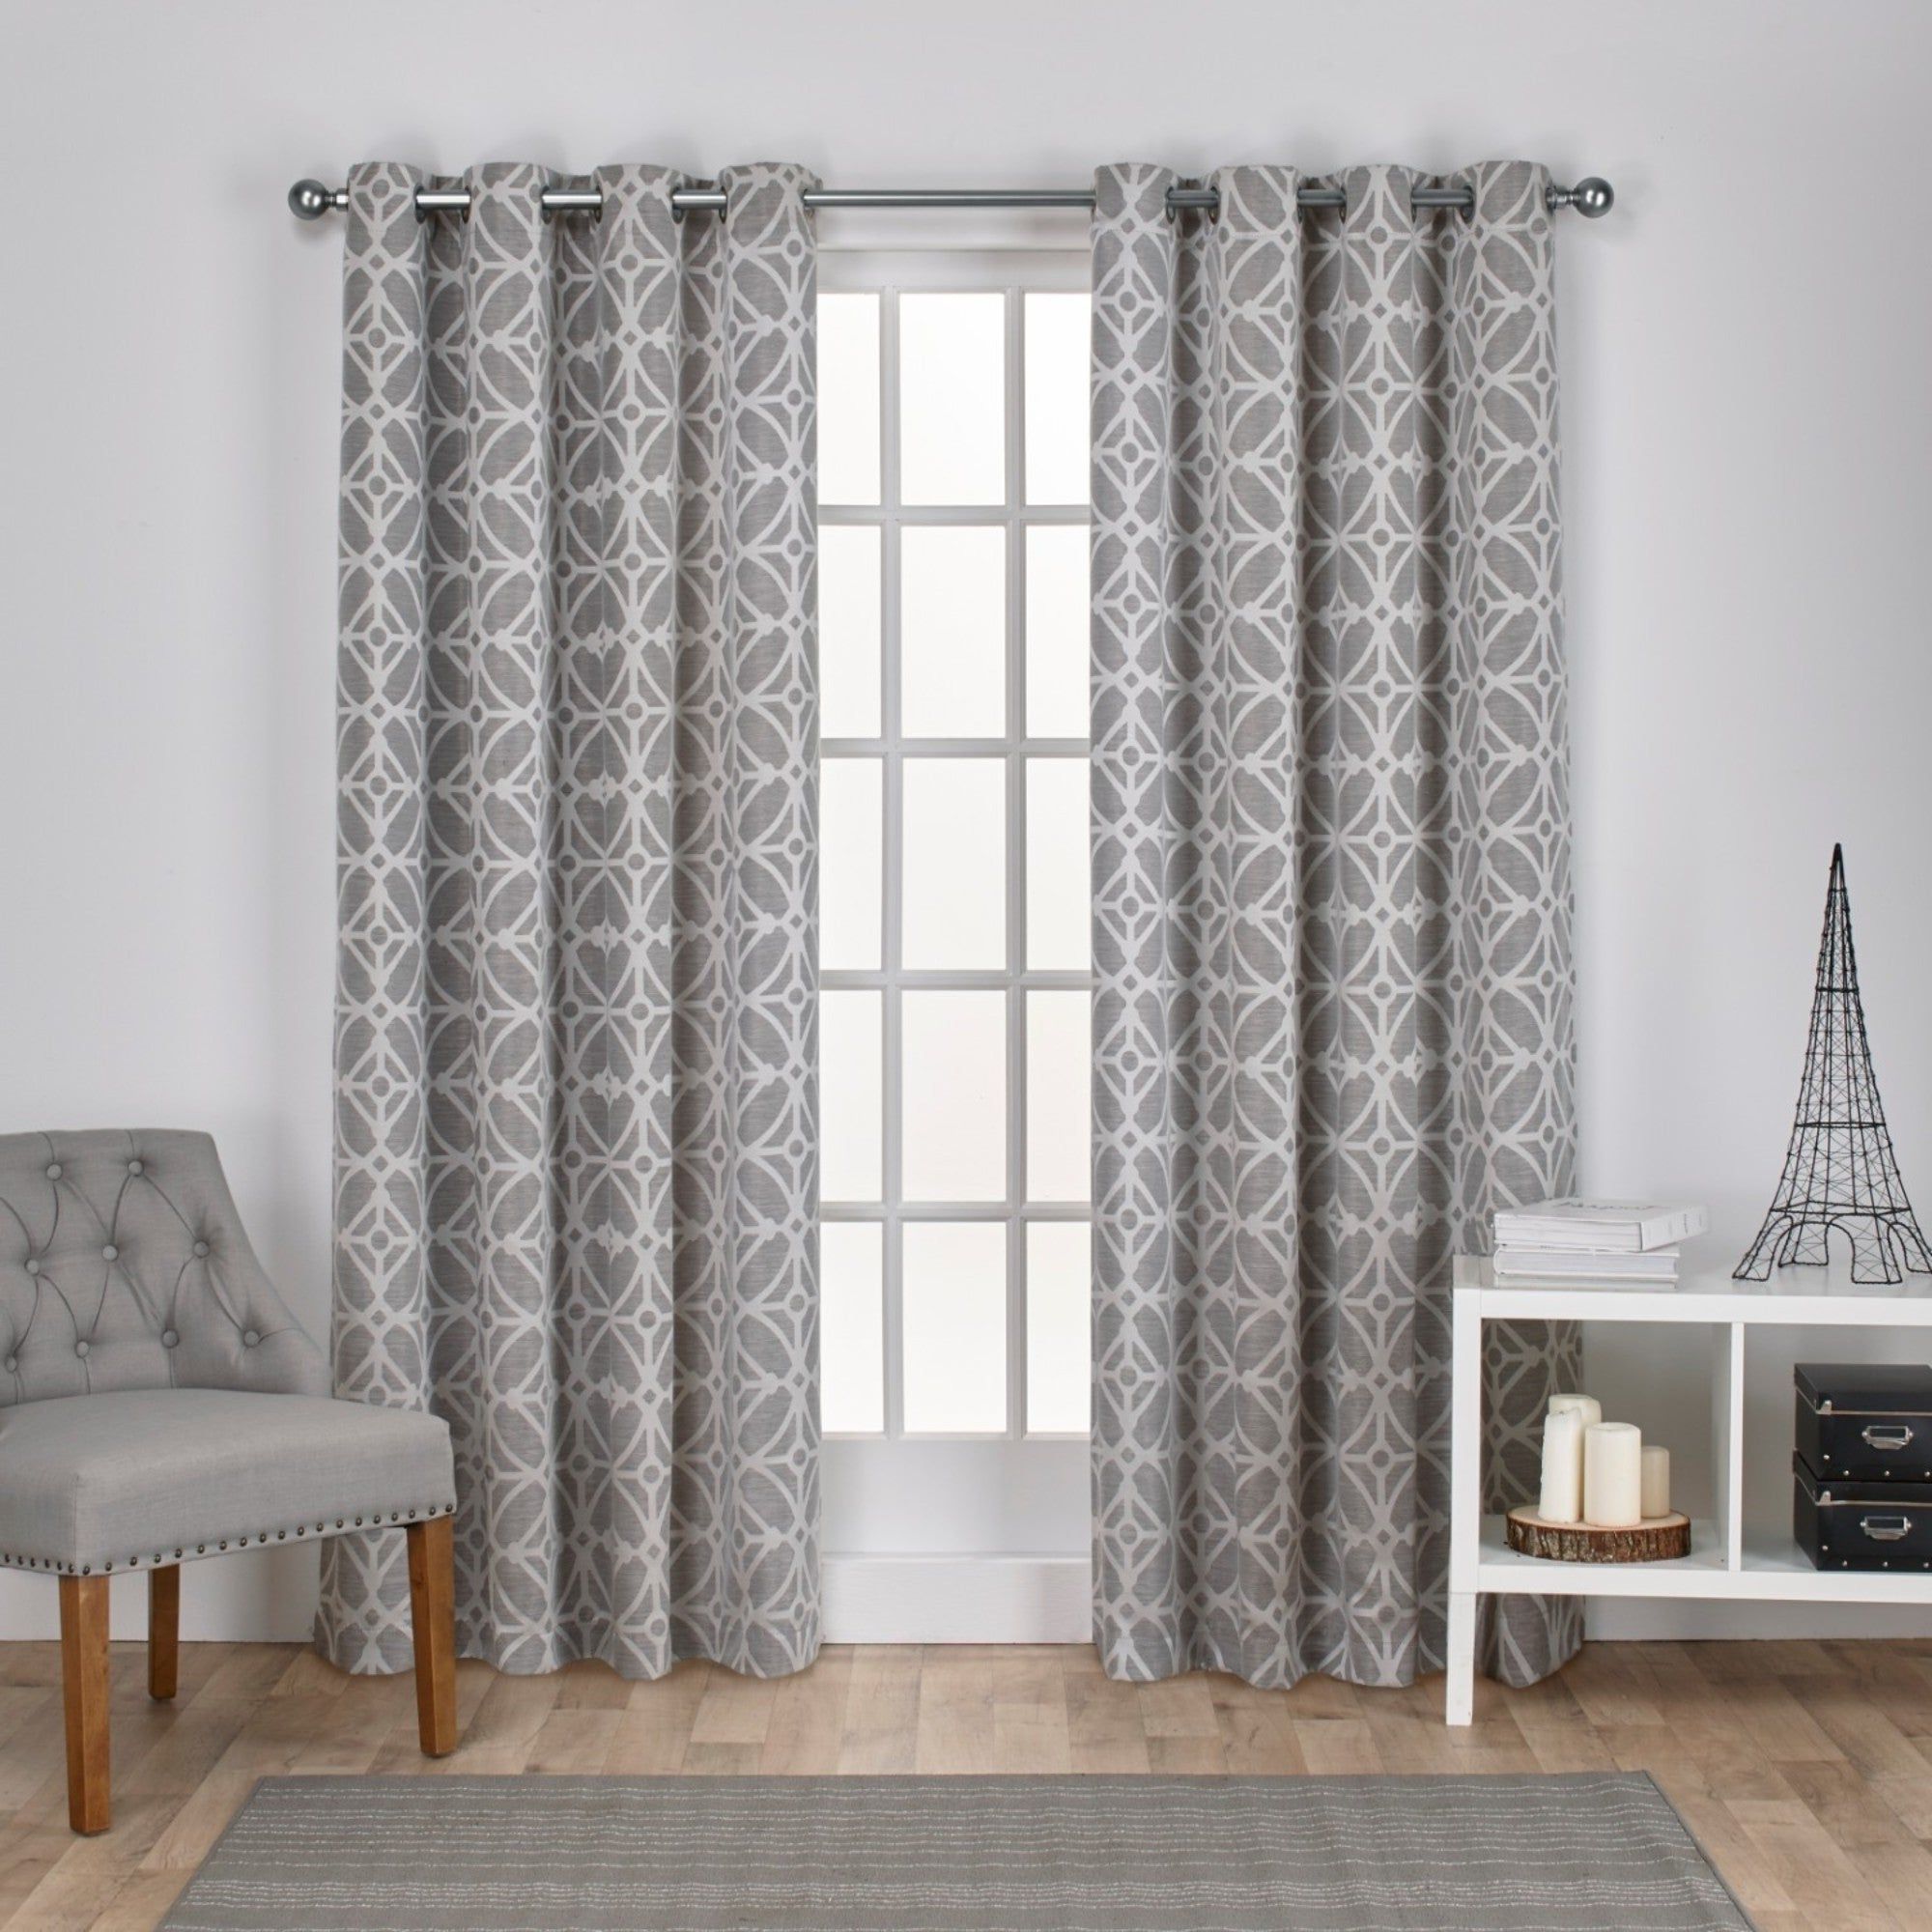 The Curated Nomad Duane Jacquard Grommet Top Curtain Panel Pairs With Trendy The Curated Nomad Market St Jacquard Grommet Top Curtain Panel Pair (View 1 of 21)